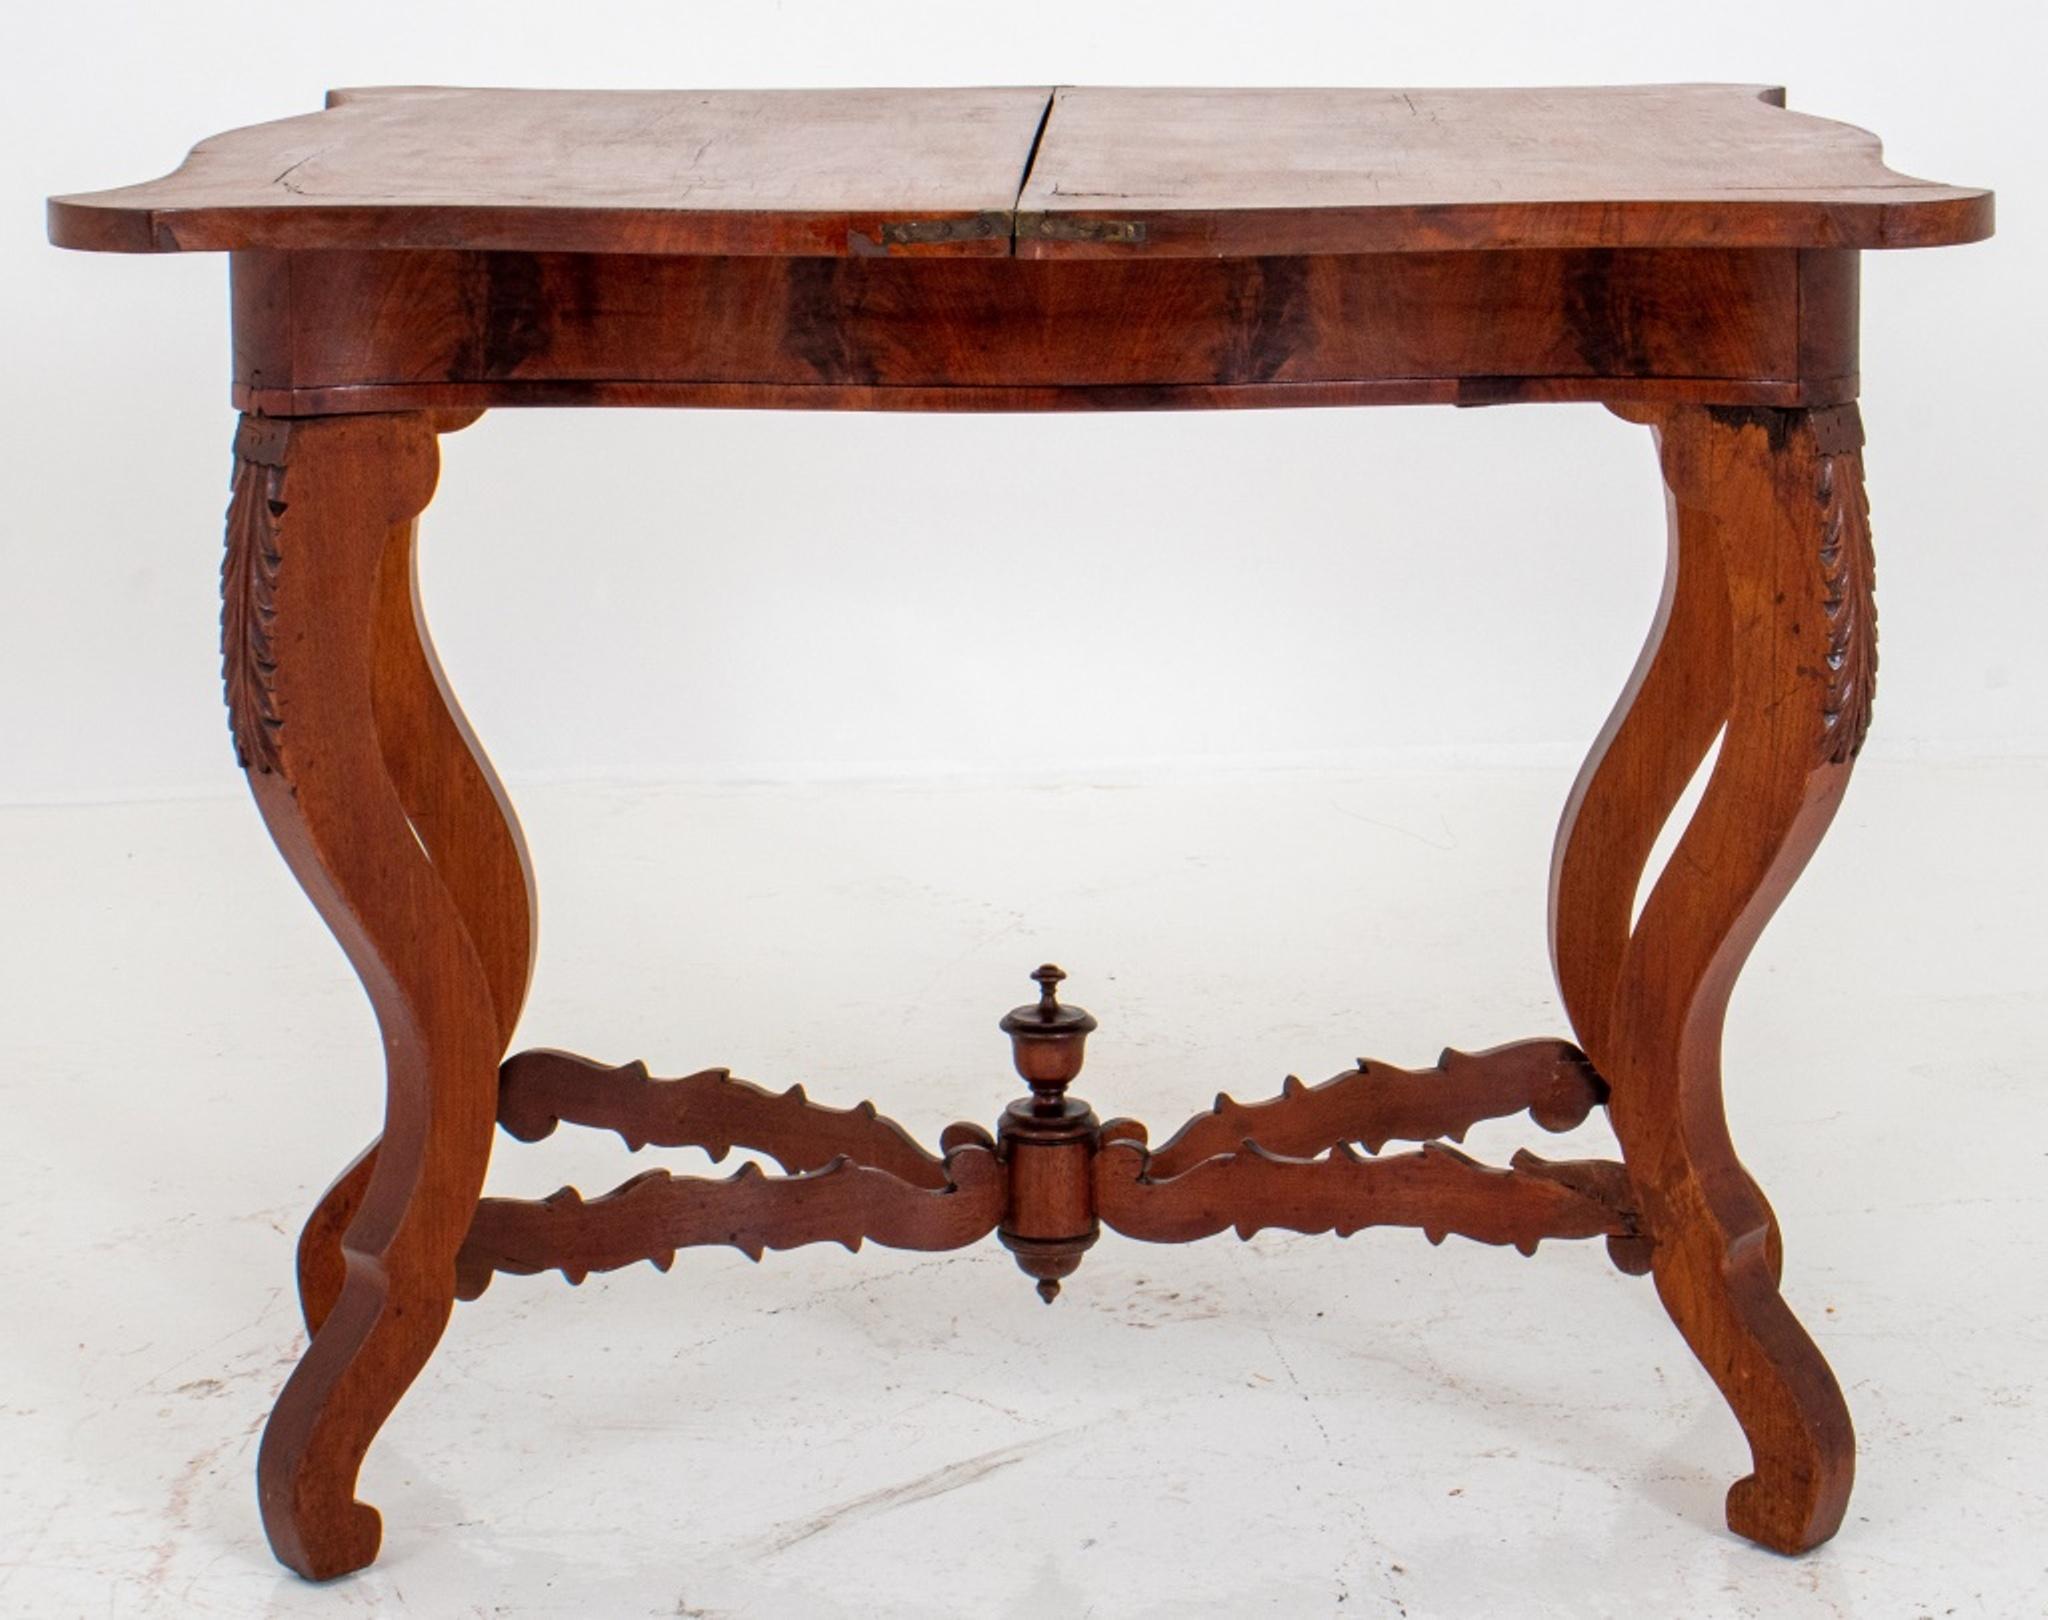 American Victorian mahogany veneer console game table with flip top and carved scroll legs. In very good vintage condition.

Dealer: S138XX